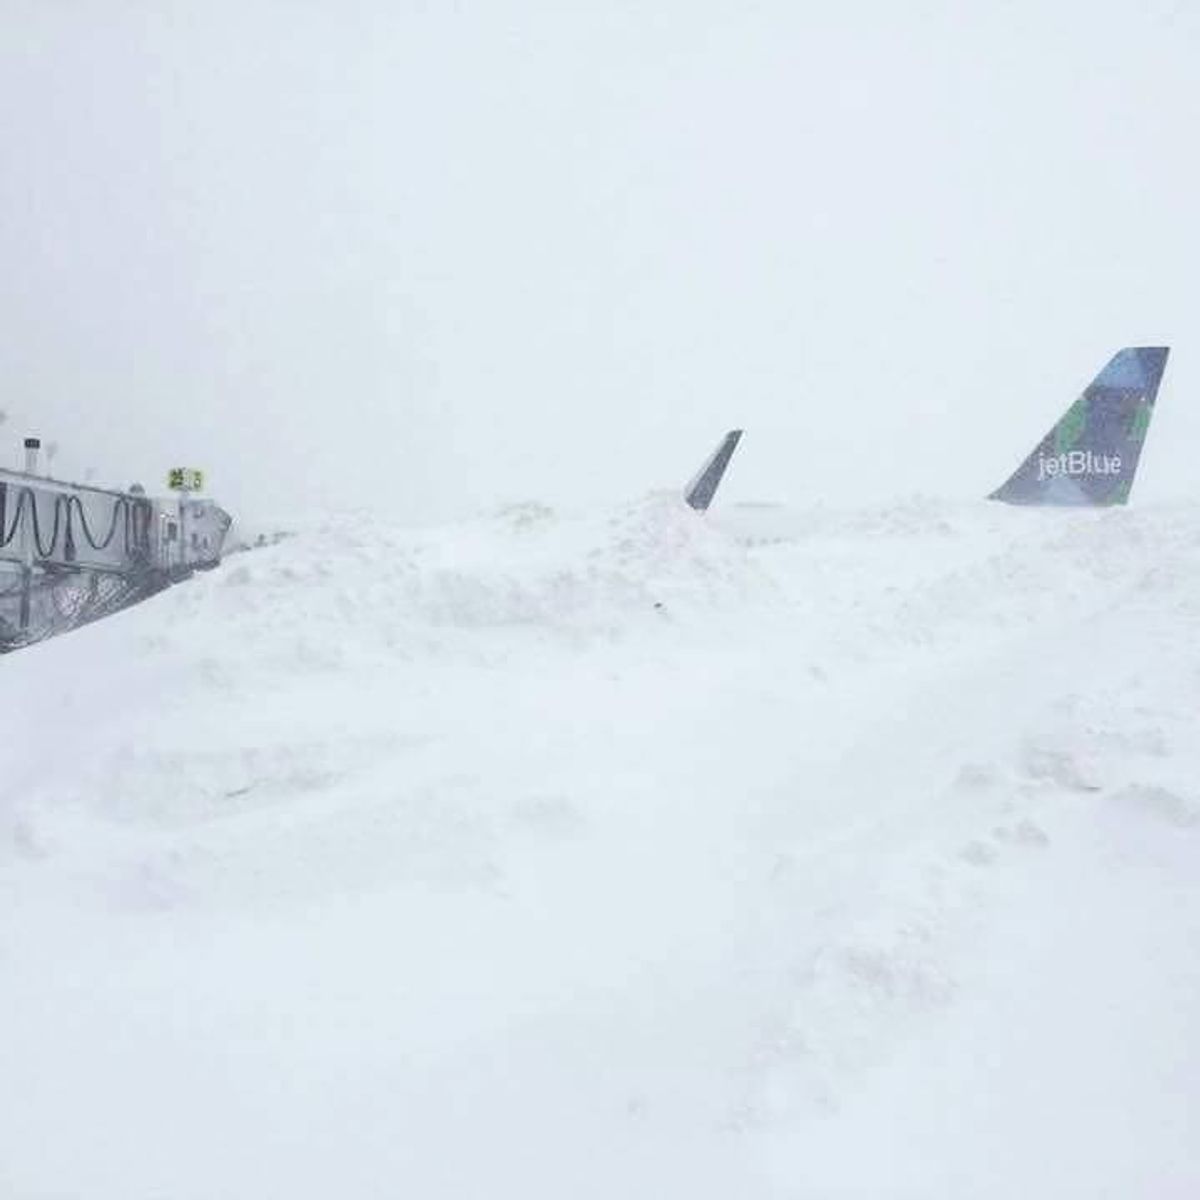 MISCAPTIONED: JetBlue Plane Buried by Snow